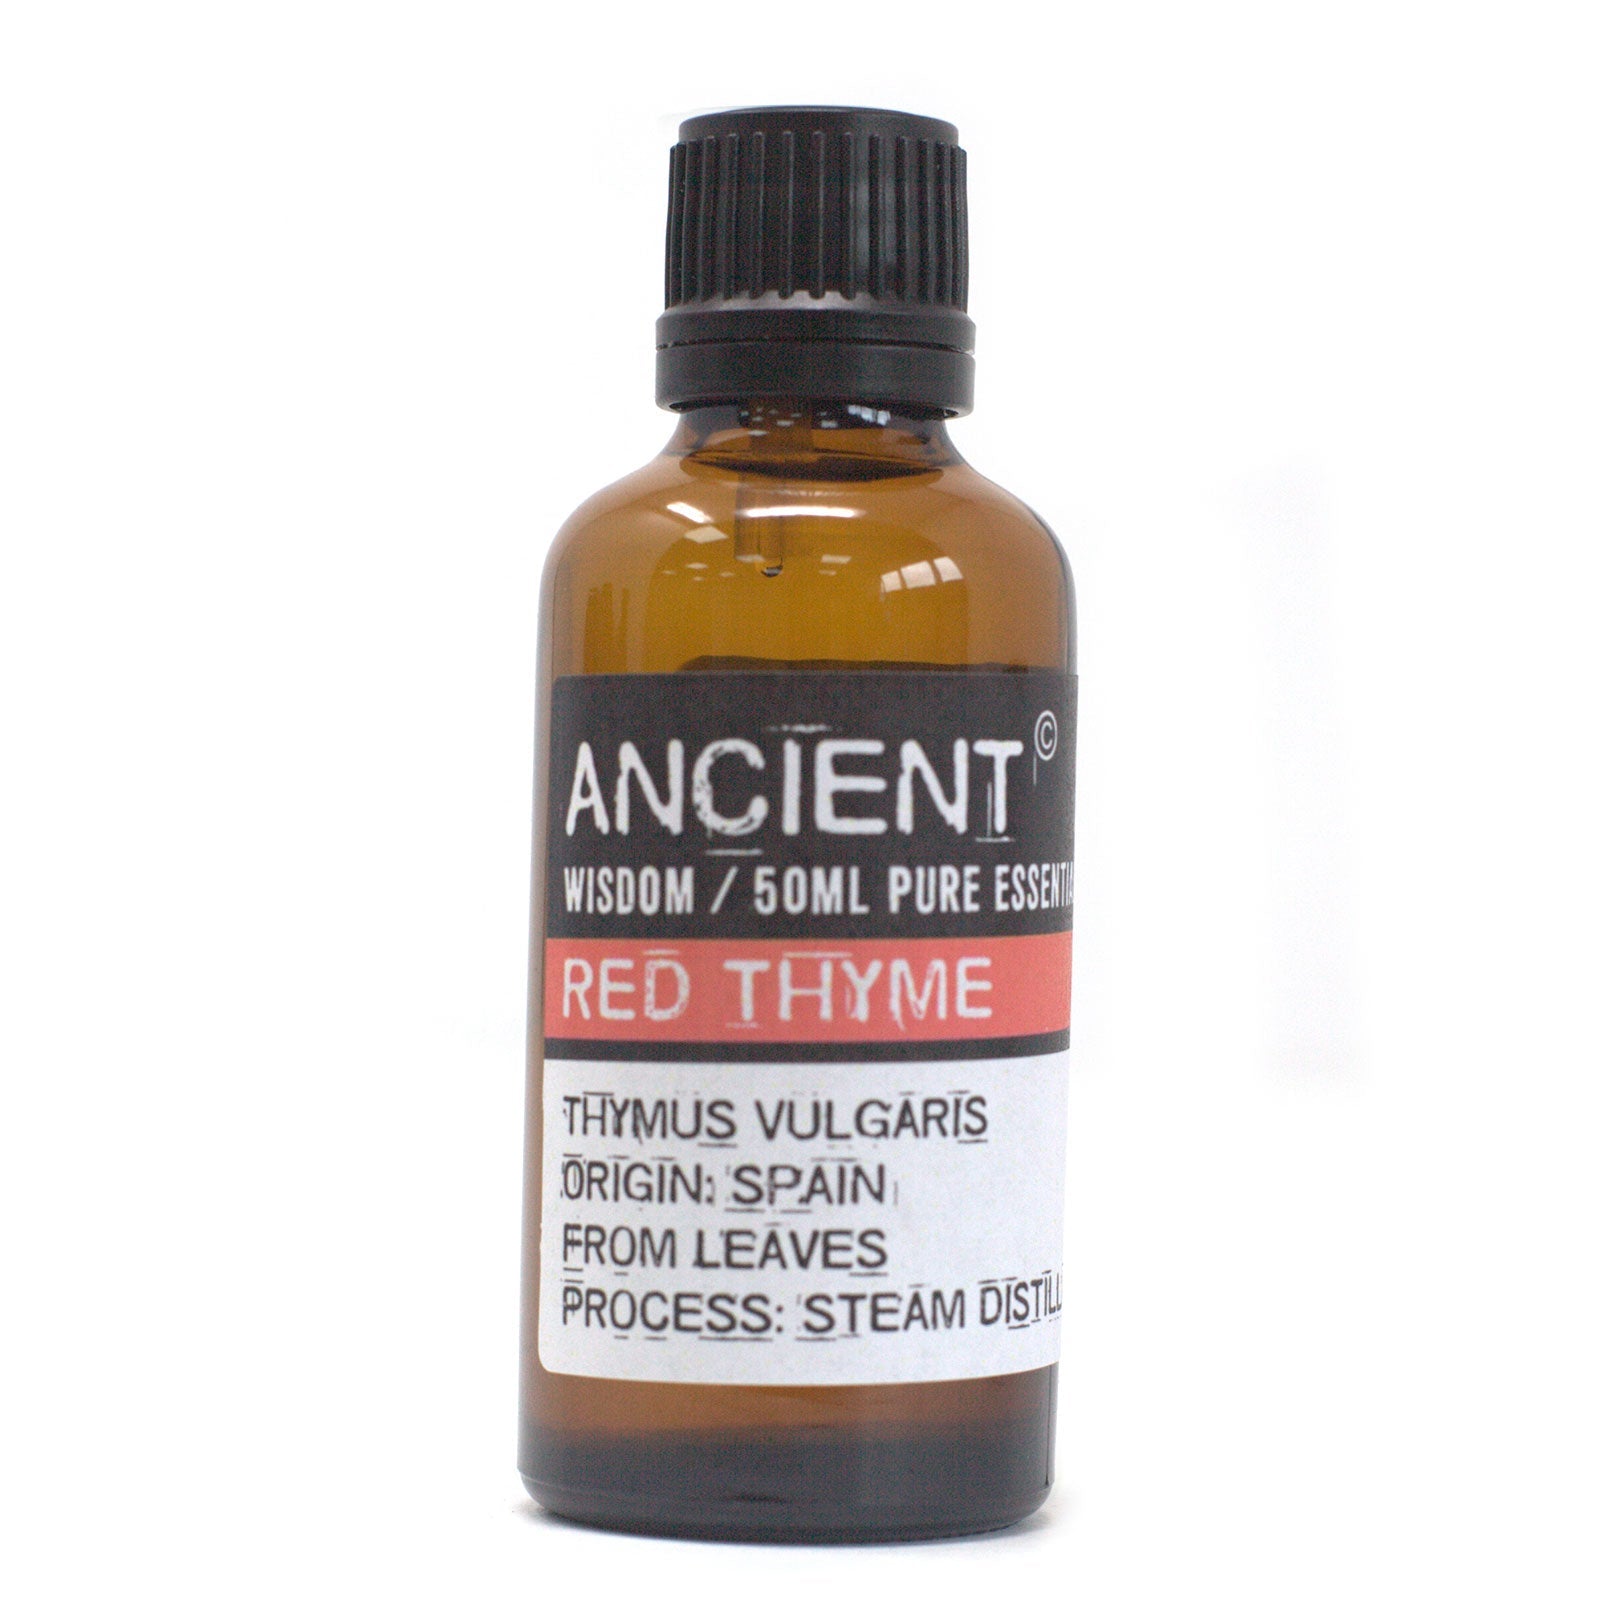 View Red Thyme Essential Oil 50ml information